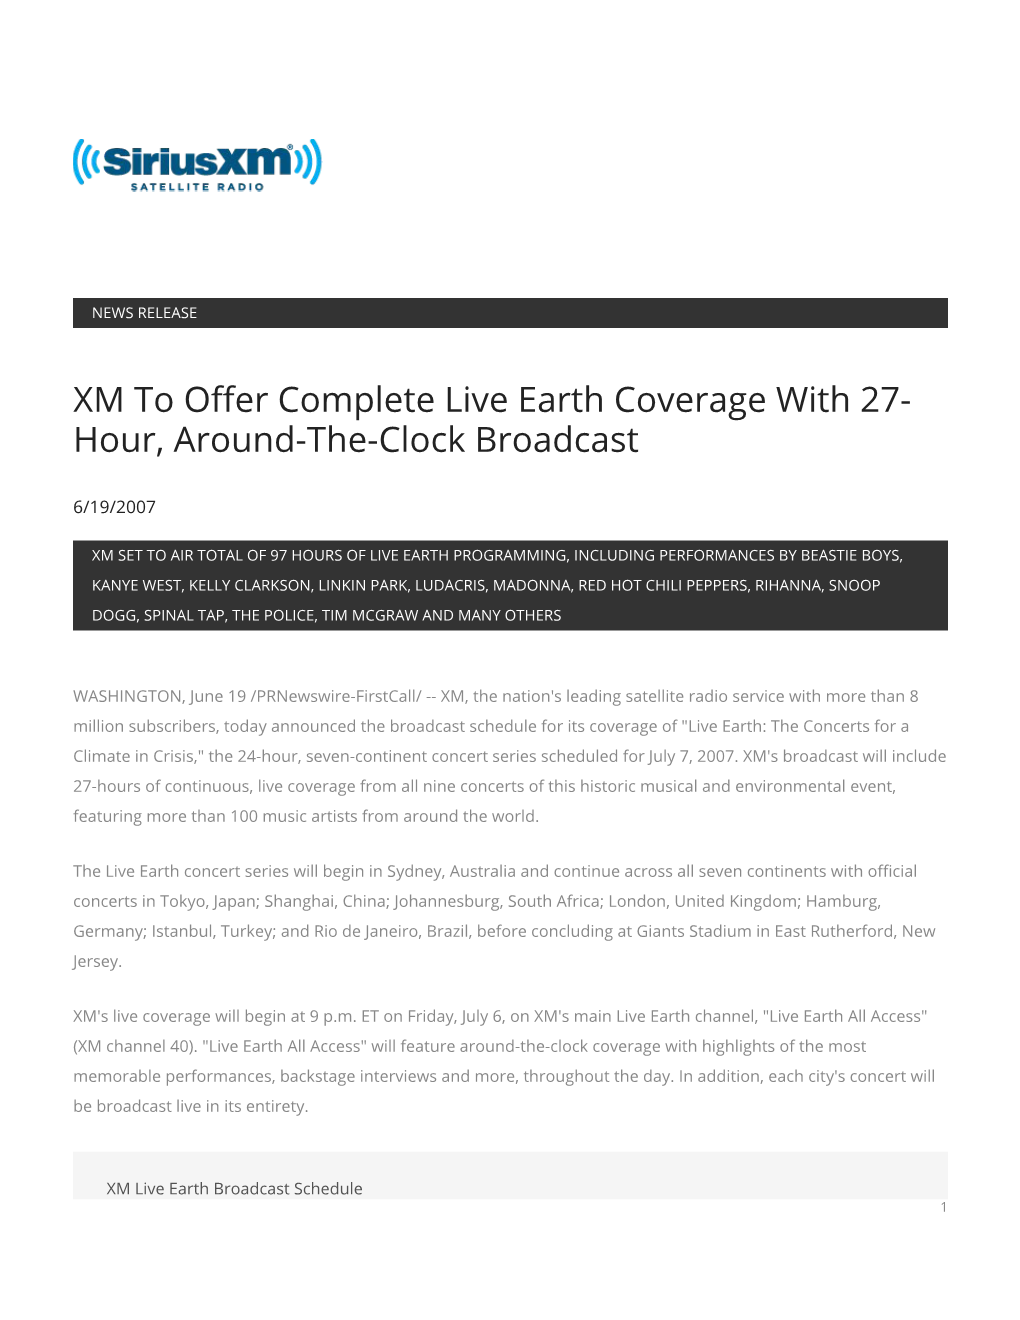 XM to Offer Complete Live Earth Coverage with 27- Hour, Around-The-Clock Broadcast